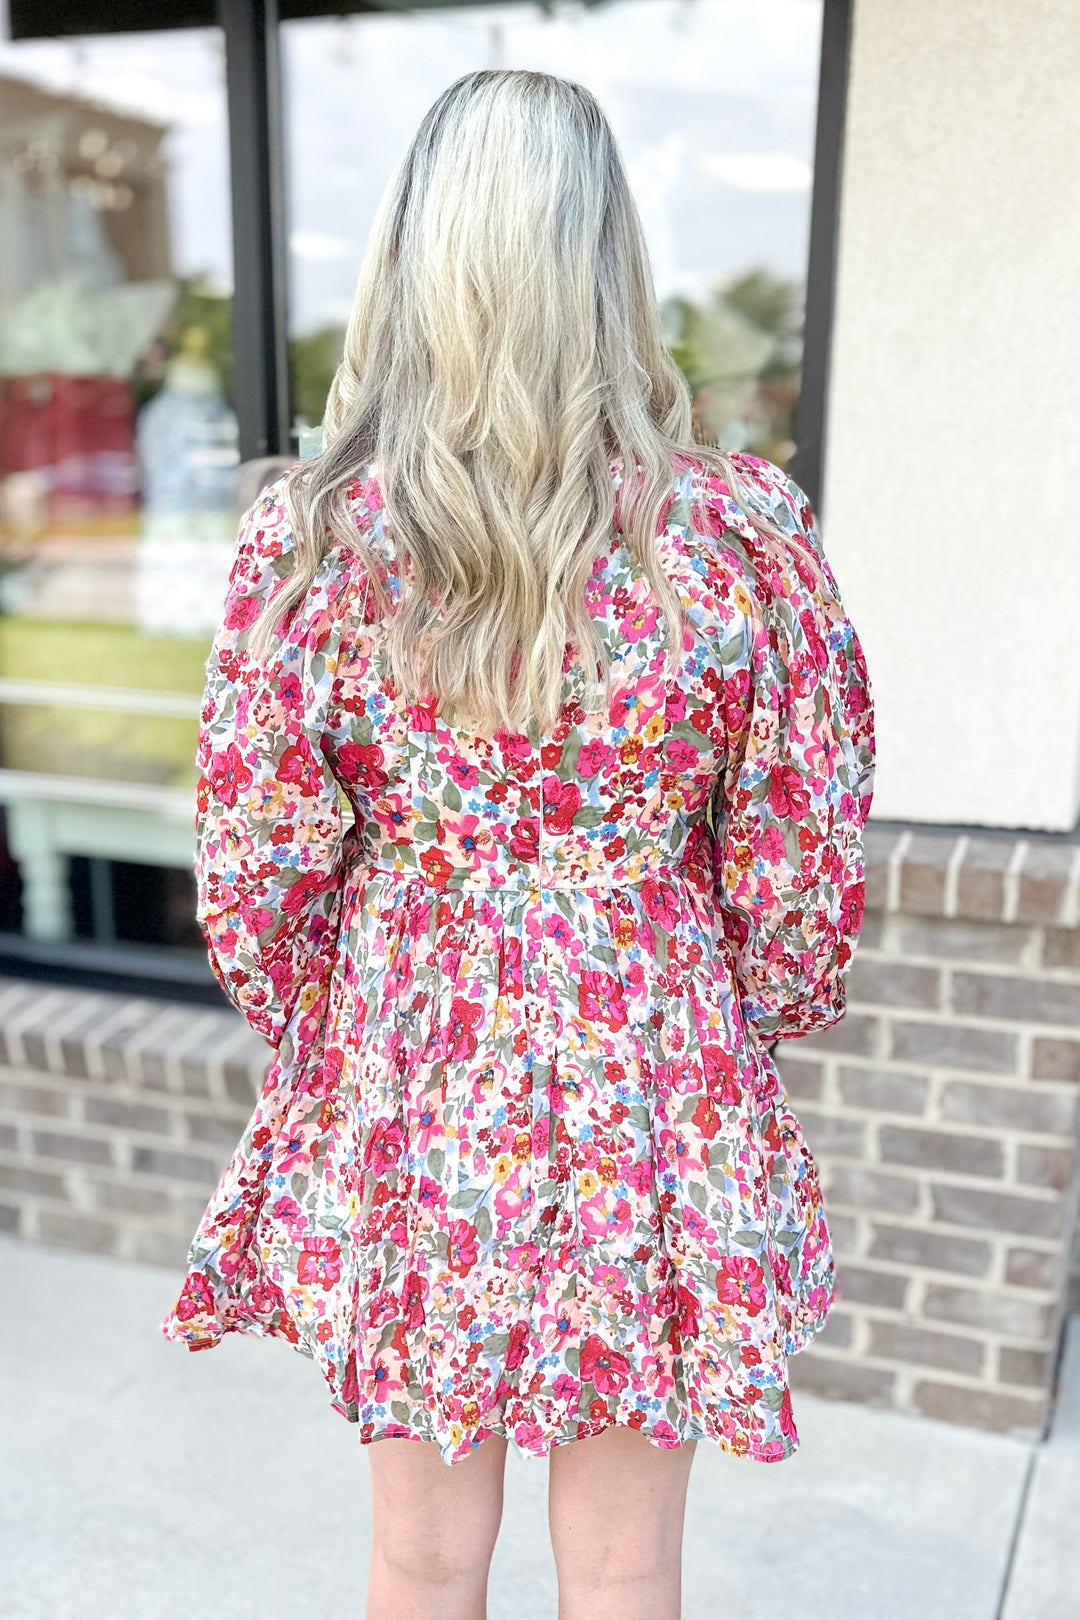 PINK FLORAL 3/4 PUFF SLEEVE DRESS